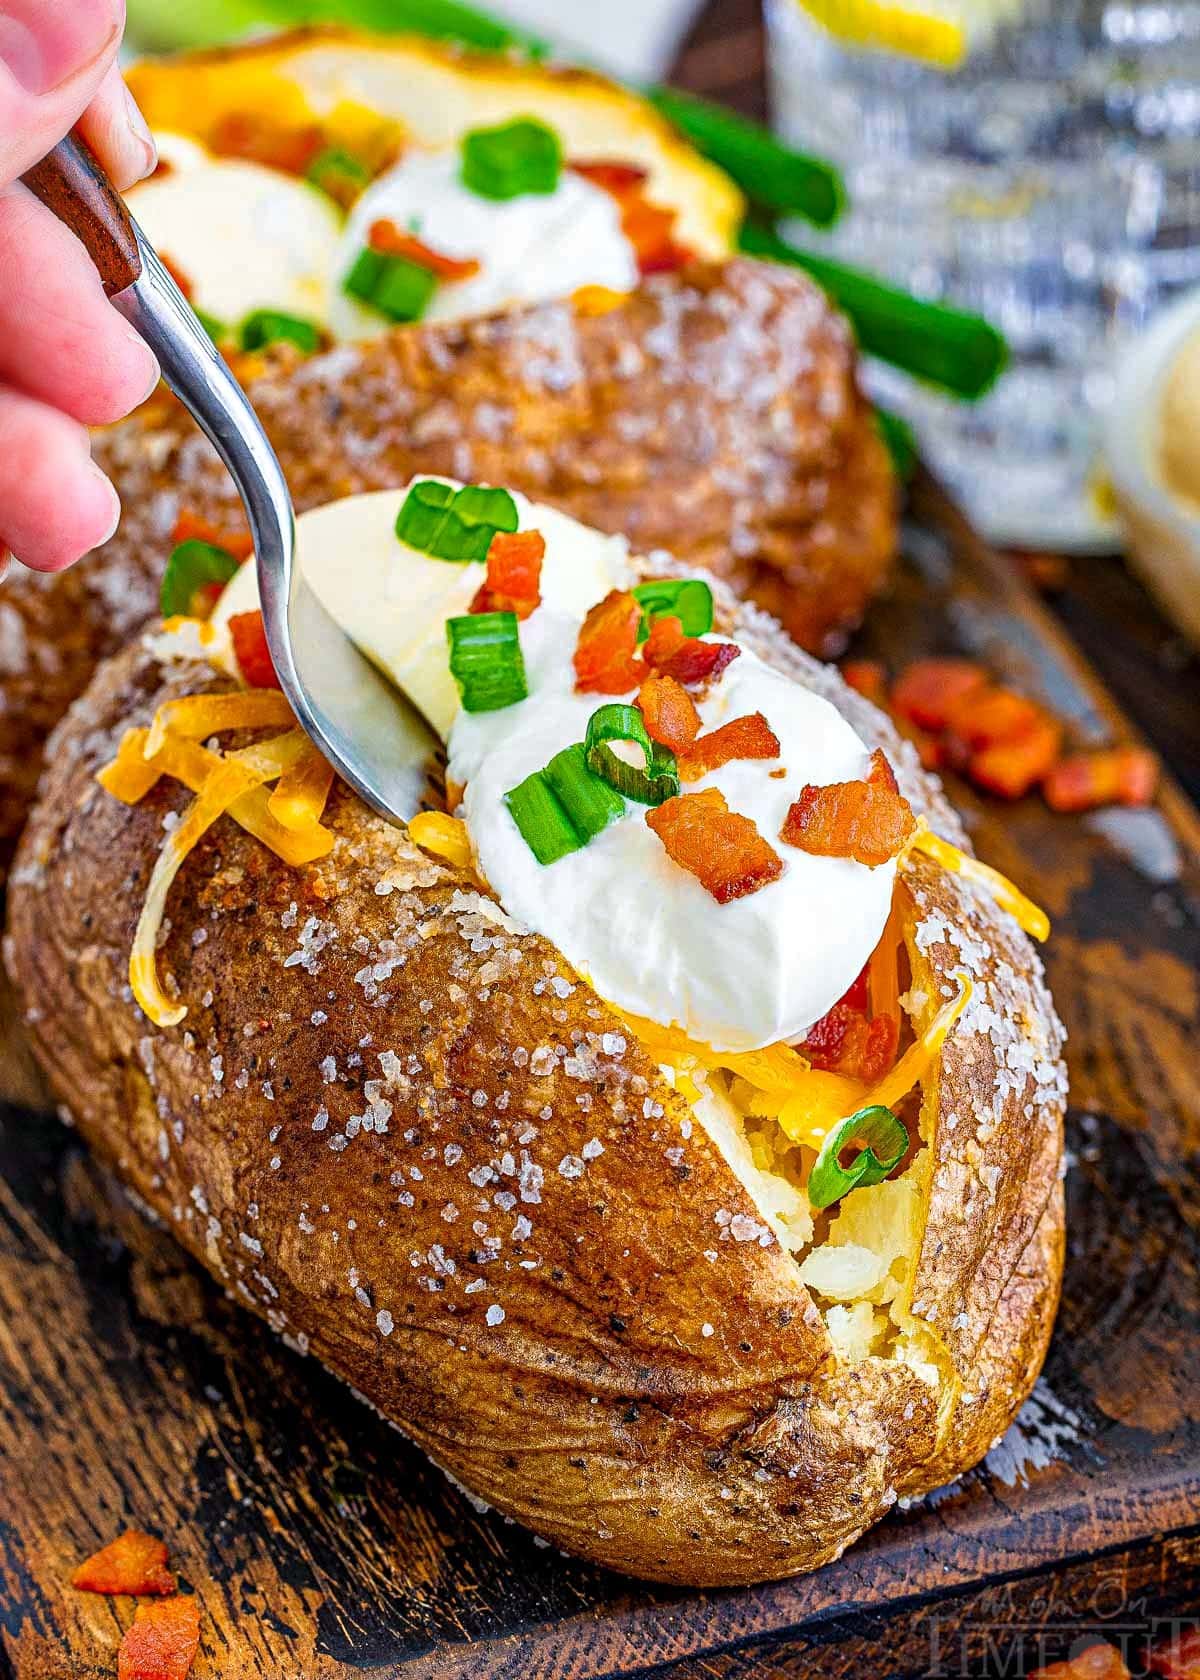 fork is inserted into the loaded baked potato as if ready to pull out a bite. potatoes are sitting on a dark wood board.